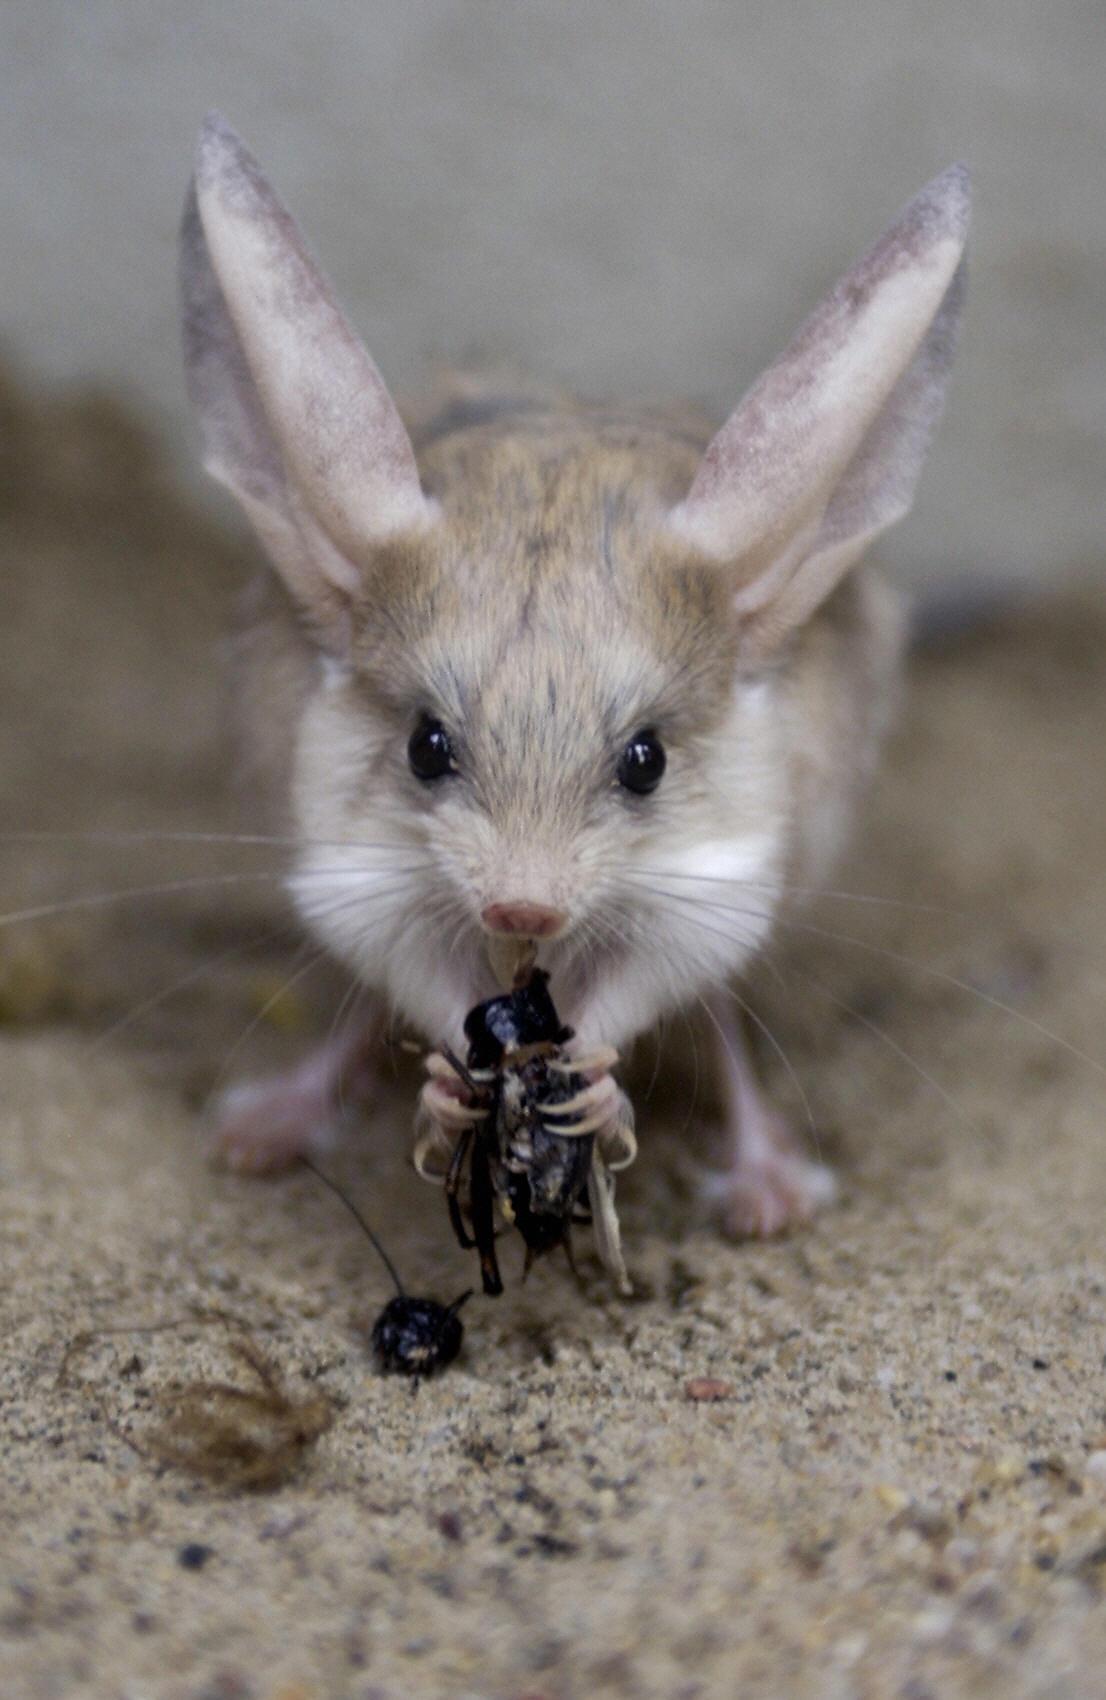  A long-eared jerboa of the zoo of Magdeburg eats an insect, June 14, 2004, in the eastern town of Halle, Germany. (JENS SCHLUETER/DDP/AFP via Getty Images)